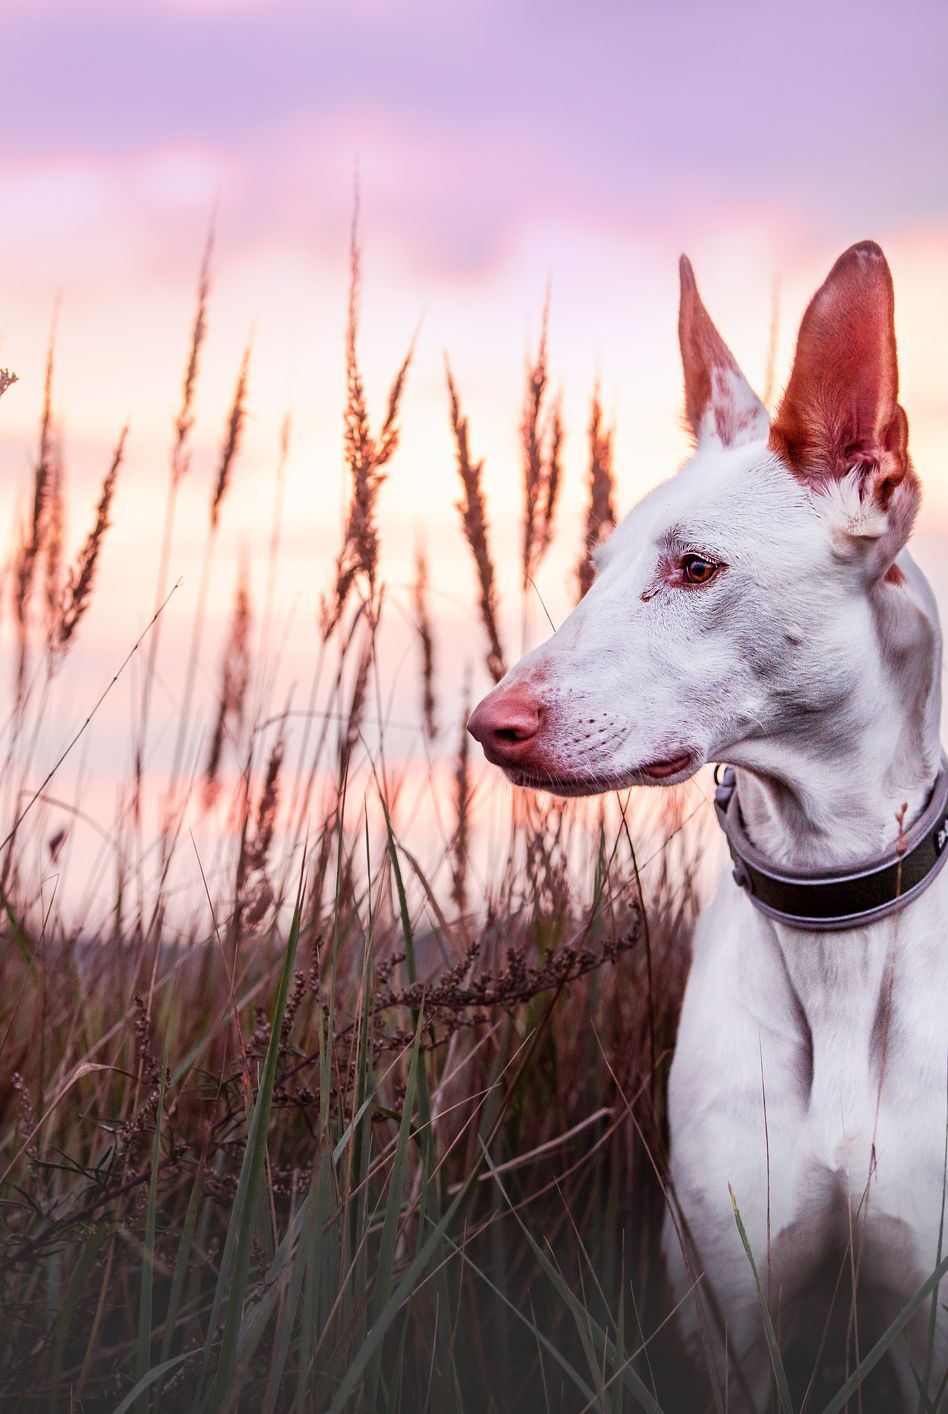 Discover the 12 Most Popular Short-Haired, Big Dog Breeds - AZ Animals